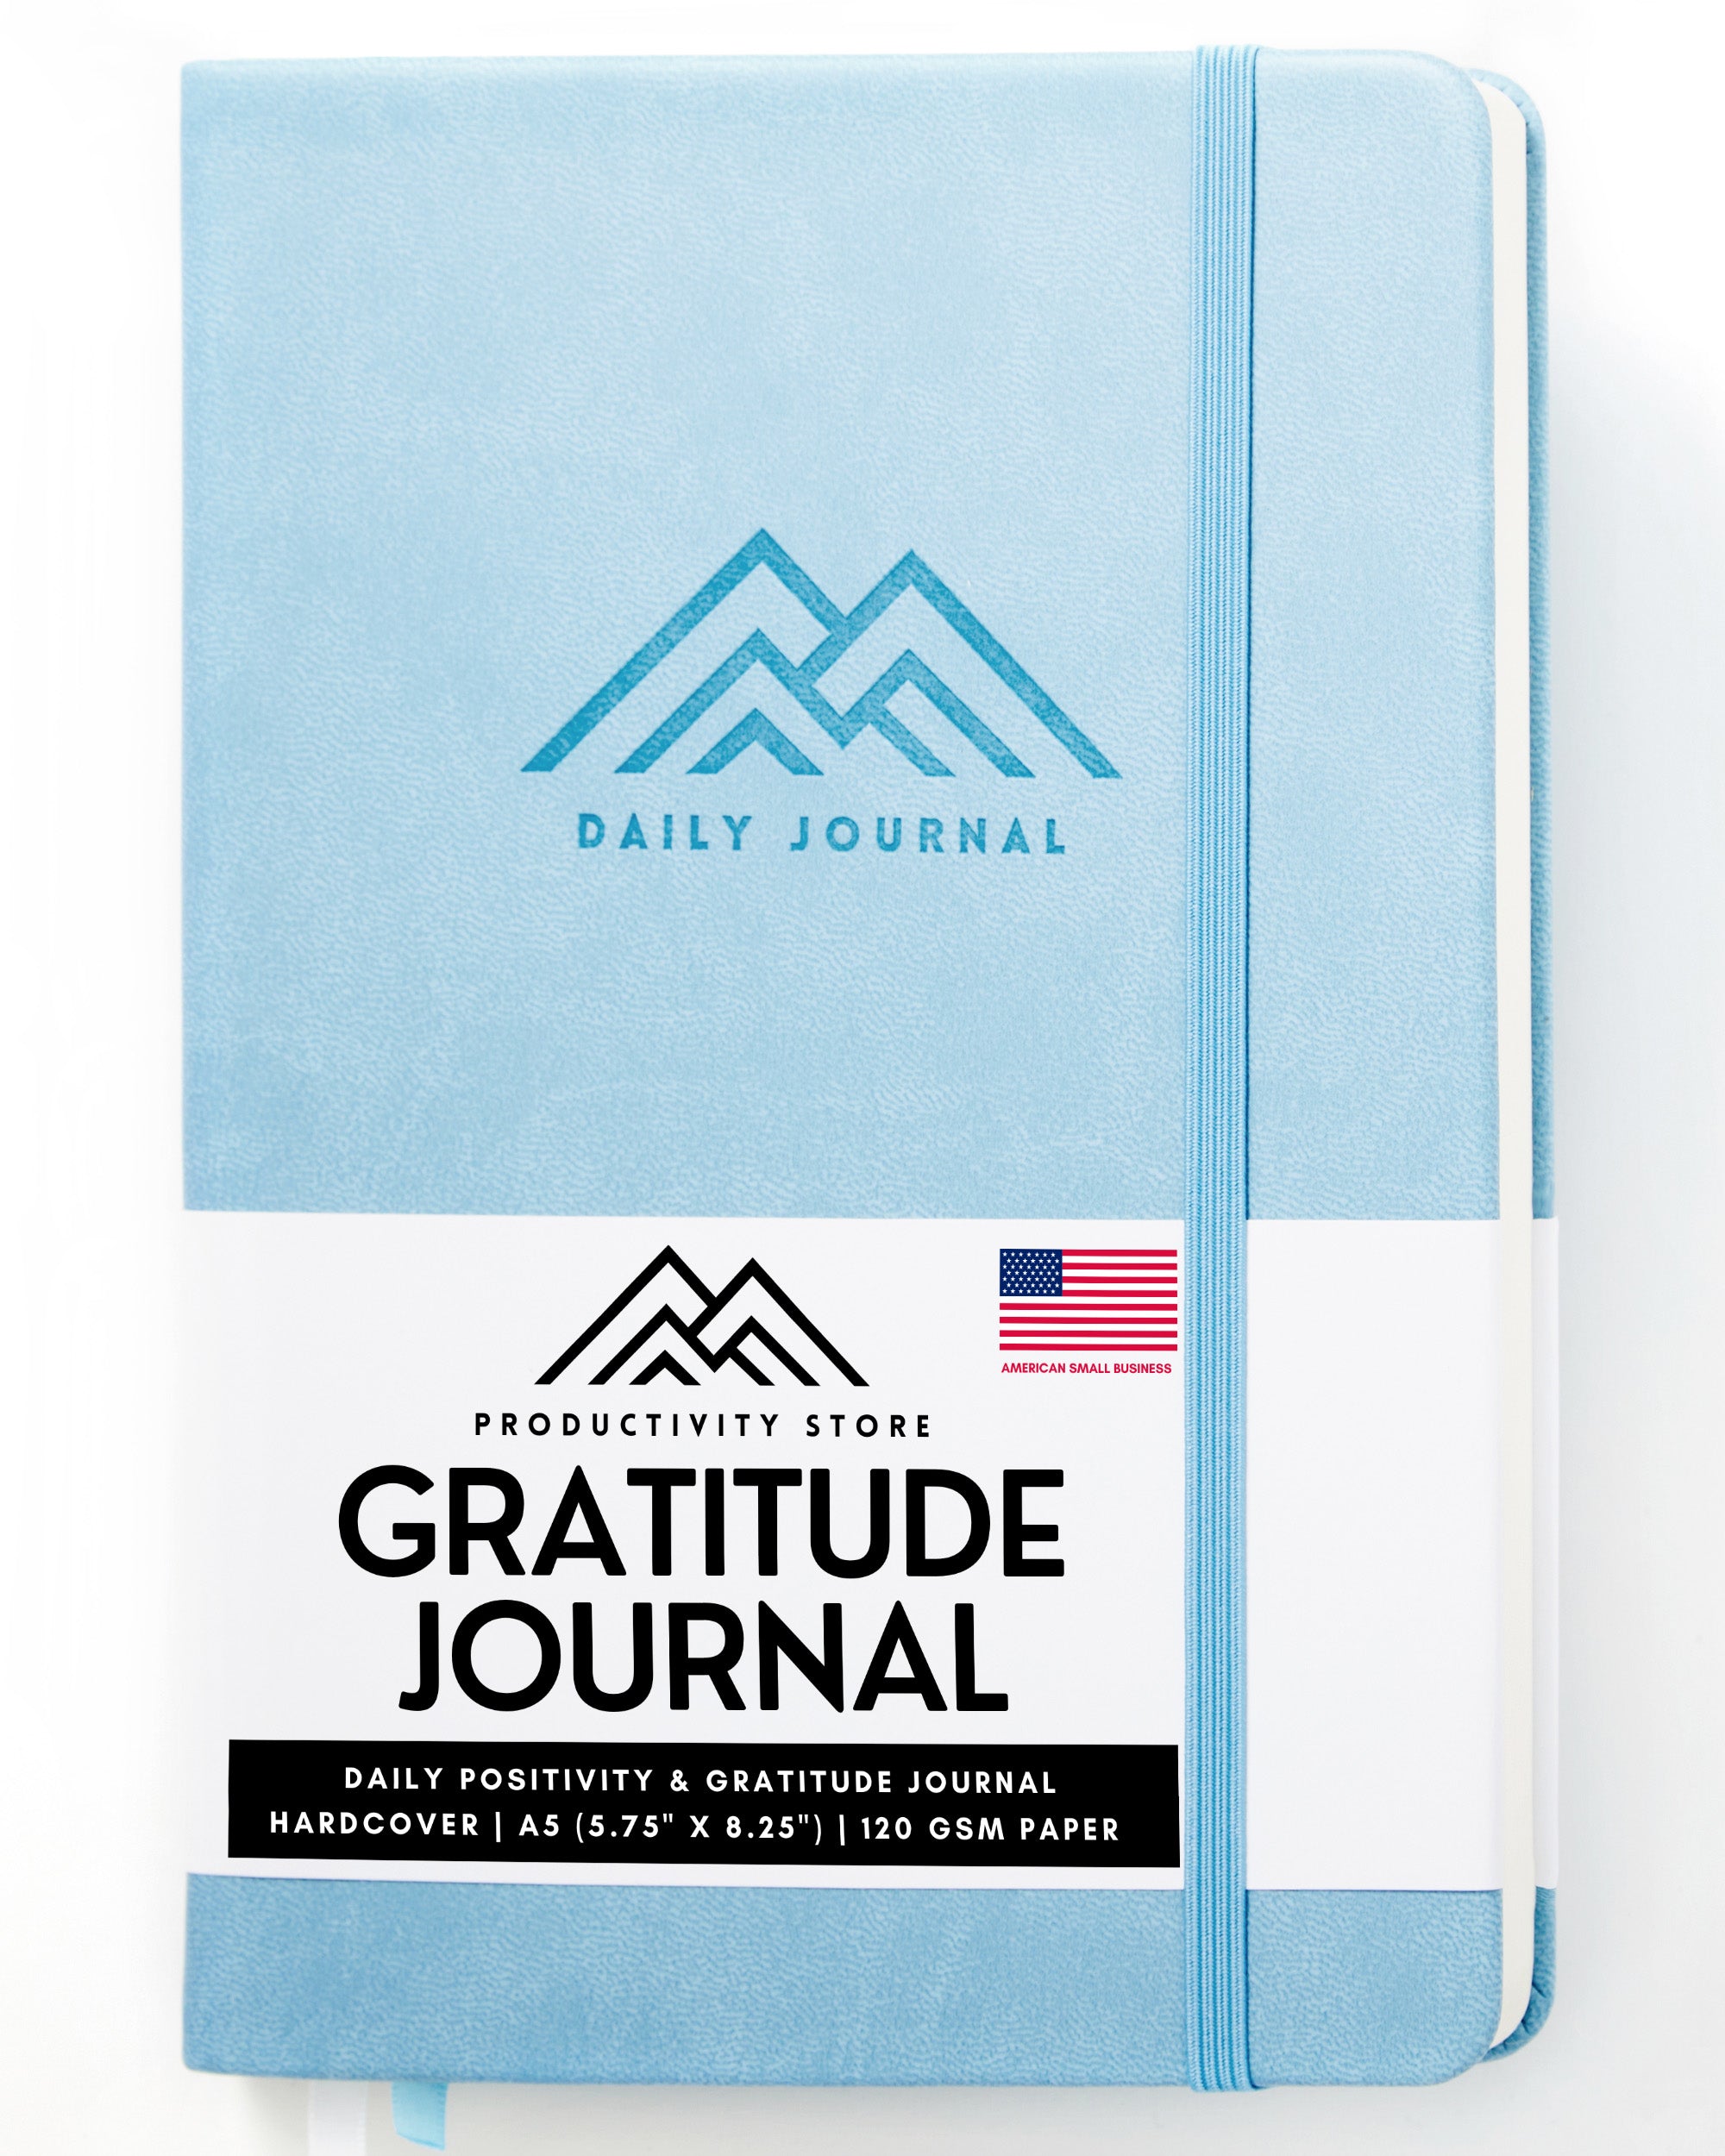 Personalized Gratitude Journals: A Meaningful Gift for Every Occasion